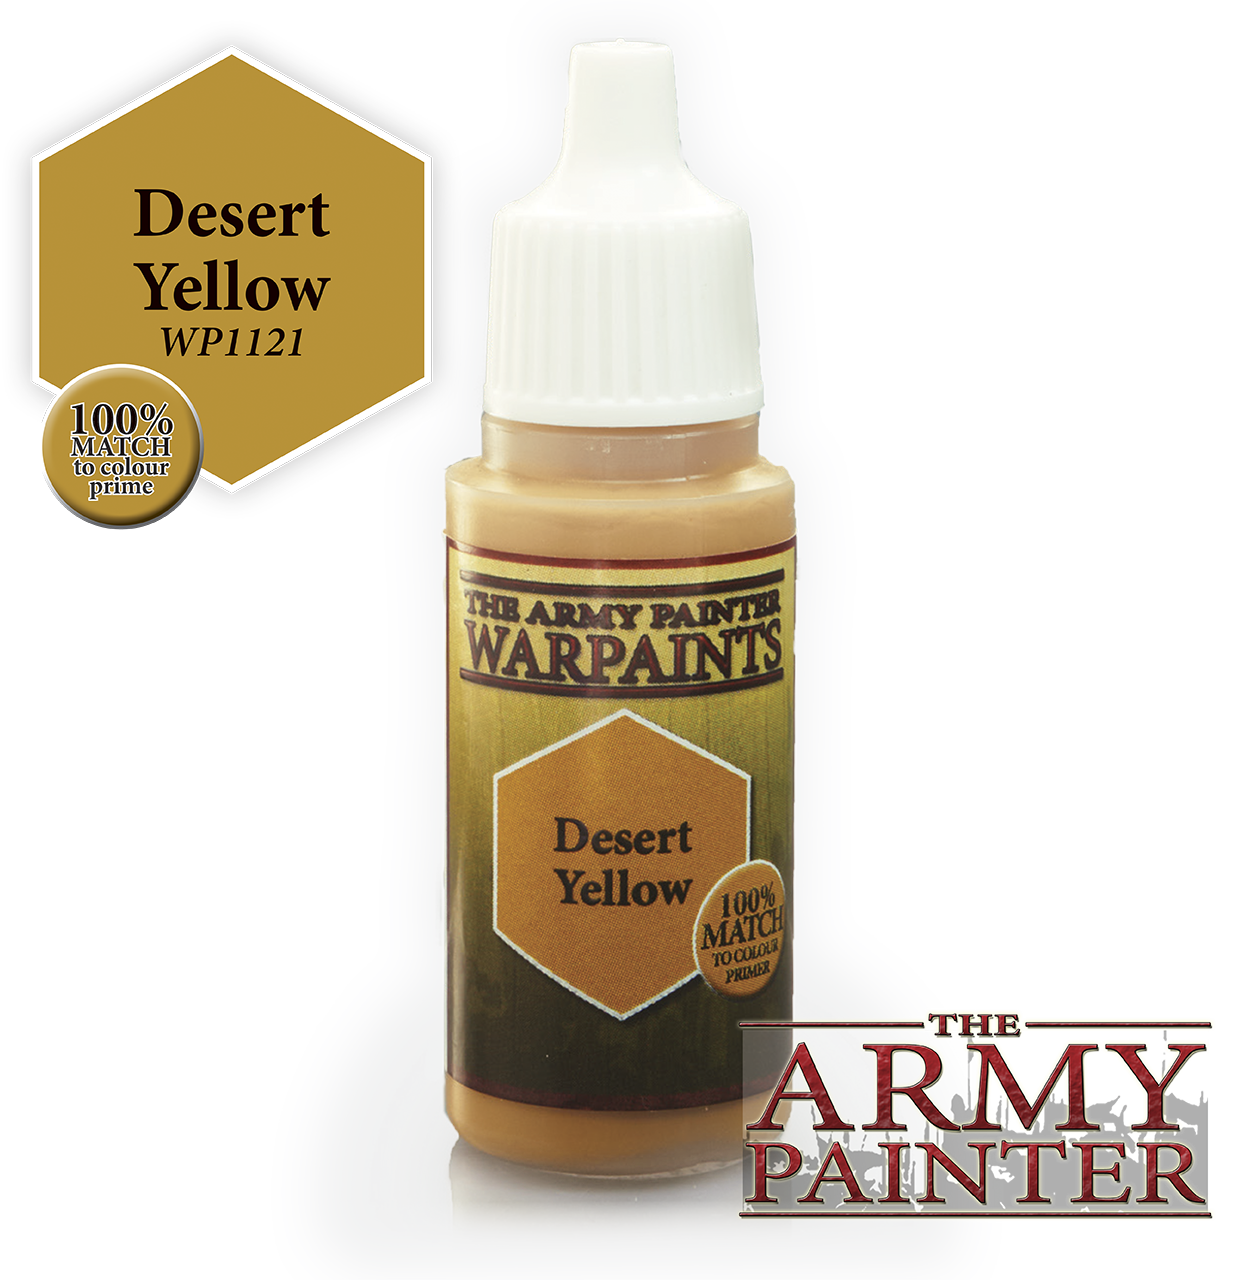 The ARMY PAINTER: Acrylics Warpaint - Desert Yellow | Tacoma Games